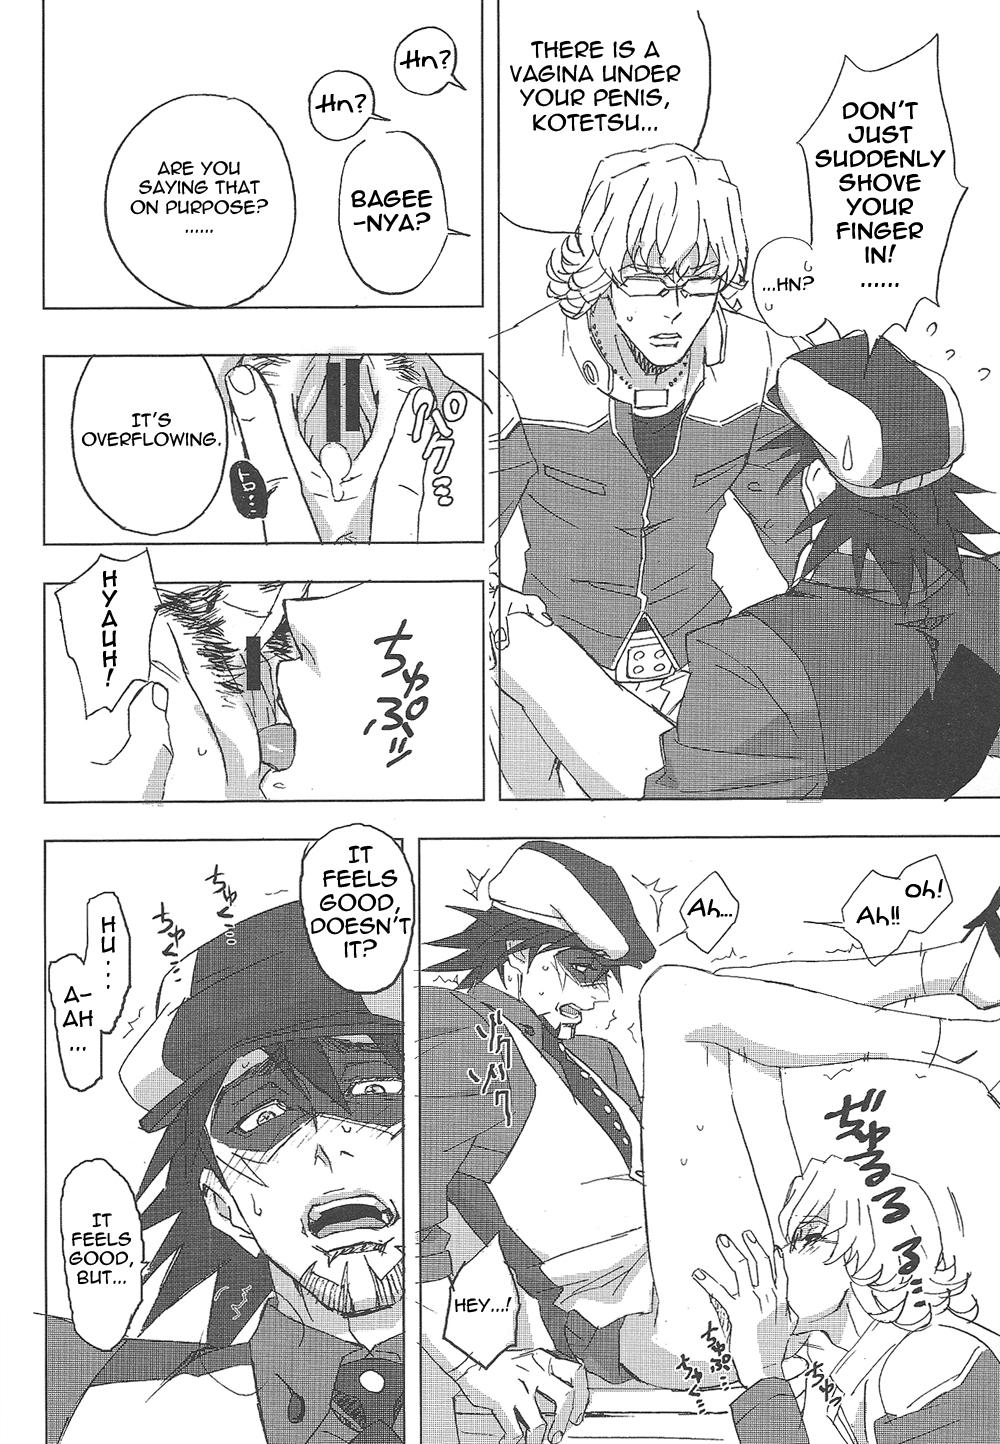 Hot Blow Jobs Toraman - Tiger and bunny Roludo - Page 2